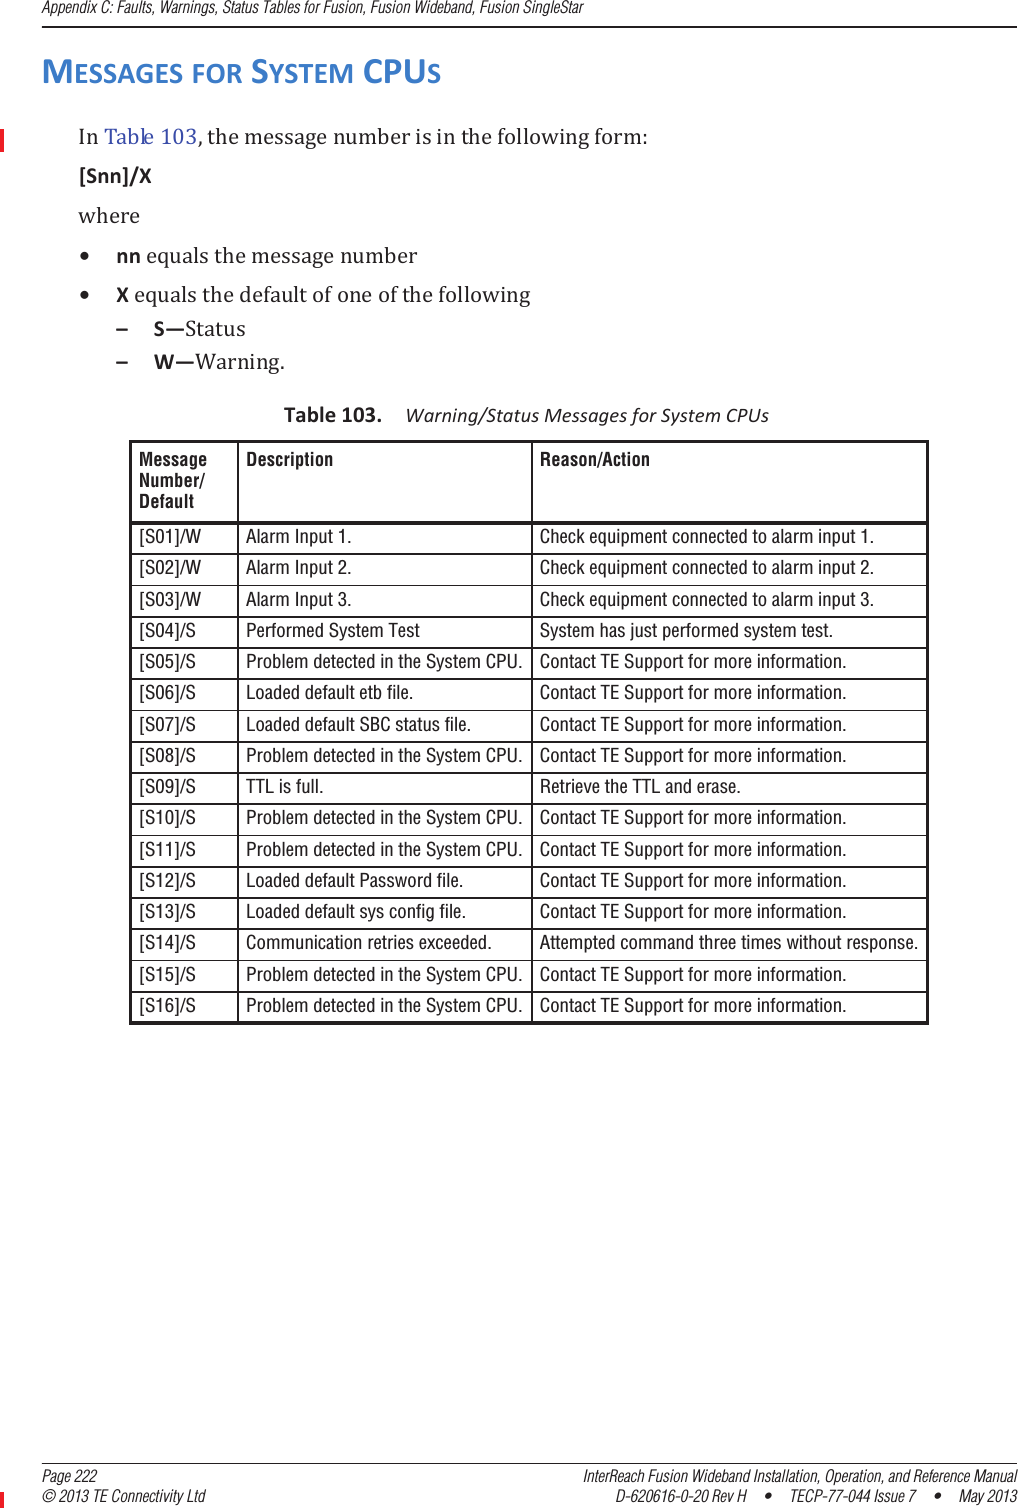 Appendix C: Faults, Warnings, Status Tables for Fusion, Fusion Wideband, Fusion SingleStar  Page 222 InterReach Fusion Wideband Installation, Operation, and Reference Manual© 2013 TE Connectivity Ltd D-620616-0-20 Rev H  •  TECP-77-044 Issue 7  •  May 2013MESSAGESFORSYSTEMCPUSͳͲ͵ǡǣ[Snn]/X• nn• X– S—– W—ǤTable103.Warning/StatusMessagesforSystemCPUsMessage Number/DefaultDescription Reason/Action[S01]/W Alarm Input 1. Check equipment connected to alarm input 1.[S02]/W Alarm Input 2. Check equipment connected to alarm input 2.[S03]/W Alarm Input 3. Check equipment connected to alarm input 3.[S04]/S Performed System Test System has just performed system test.[S05]/S Problem detected in the System CPU. Contact TE Support for more information.[S06]/S Loaded default etb file. Contact TE Support for more information.[S07]/S Loaded default SBC status file. Contact TE Support for more information.[S08]/S Problem detected in the System CPU. Contact TE Support for more information.[S09]/S TTL is full. Retrieve the TTL and erase.[S10]/S Problem detected in the System CPU. Contact TE Support for more information.[S11]/S Problem detected in the System CPU. Contact TE Support for more information.[S12]/S Loaded default Password file. Contact TE Support for more information.[S13]/S Loaded default sys config file. Contact TE Support for more information.[S14]/S Communication retries exceeded. Attempted command three times without response.[S15]/S Problem detected in the System CPU. Contact TE Support for more information.[S16]/S Problem detected in the System CPU. Contact TE Support for more information.